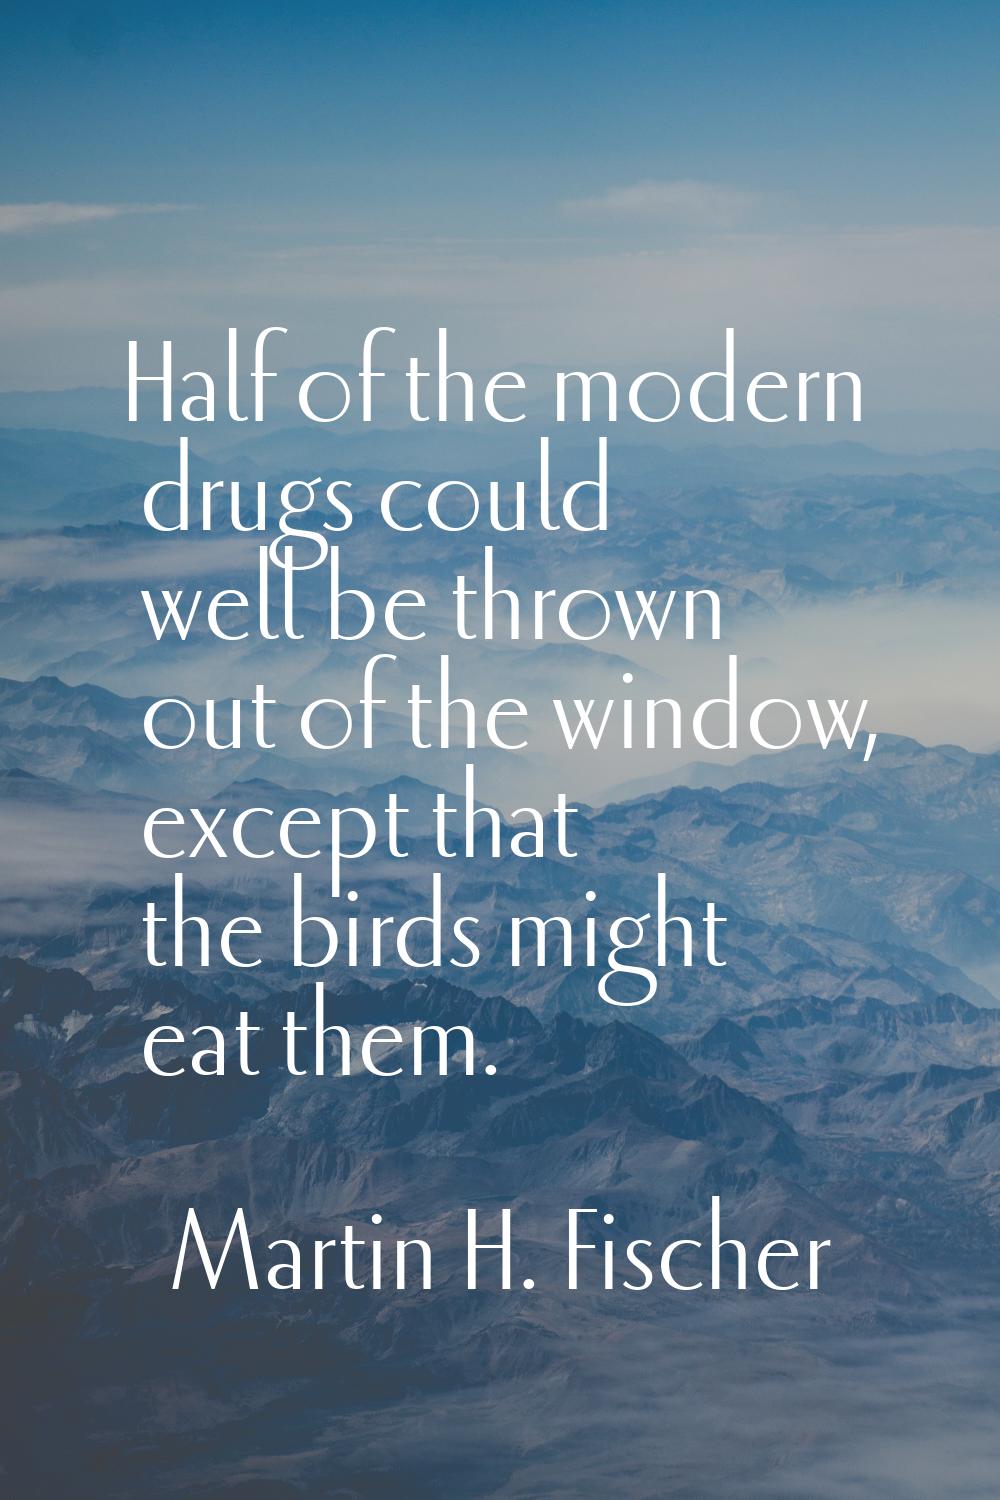 Half of the modern drugs could well be thrown out of the window, except that the birds might eat th